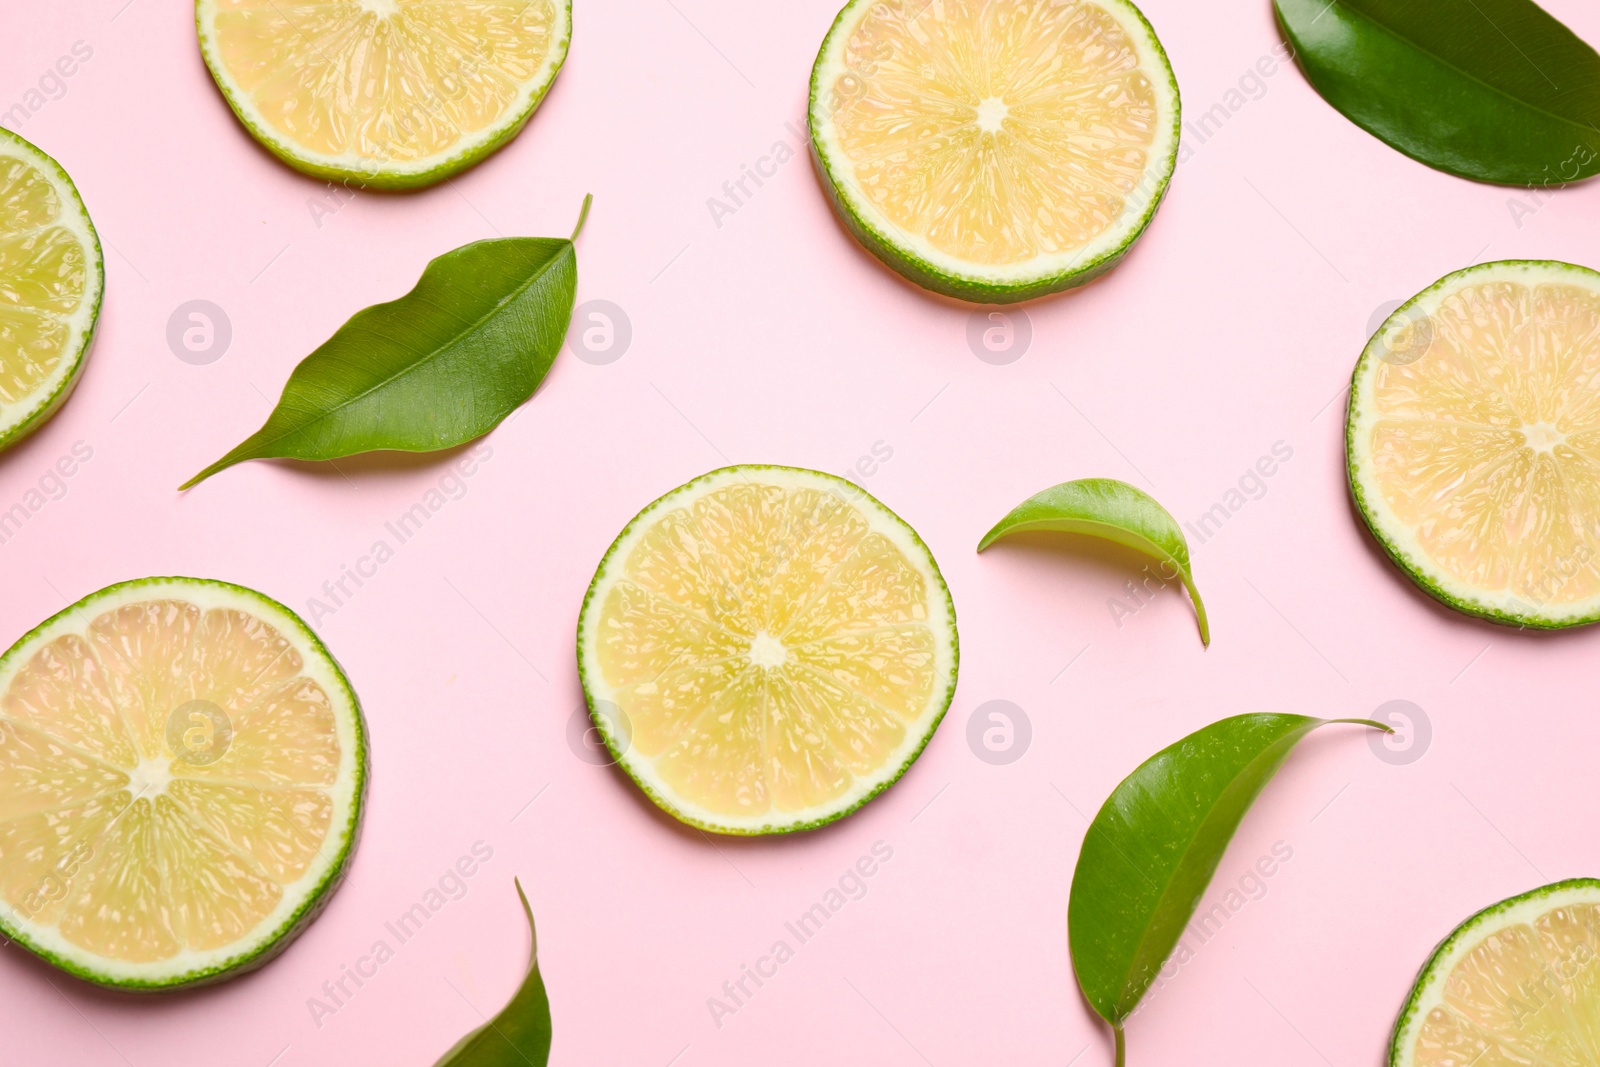 Photo of Juicy fresh lime slices and green leaves on pink background, flat lay